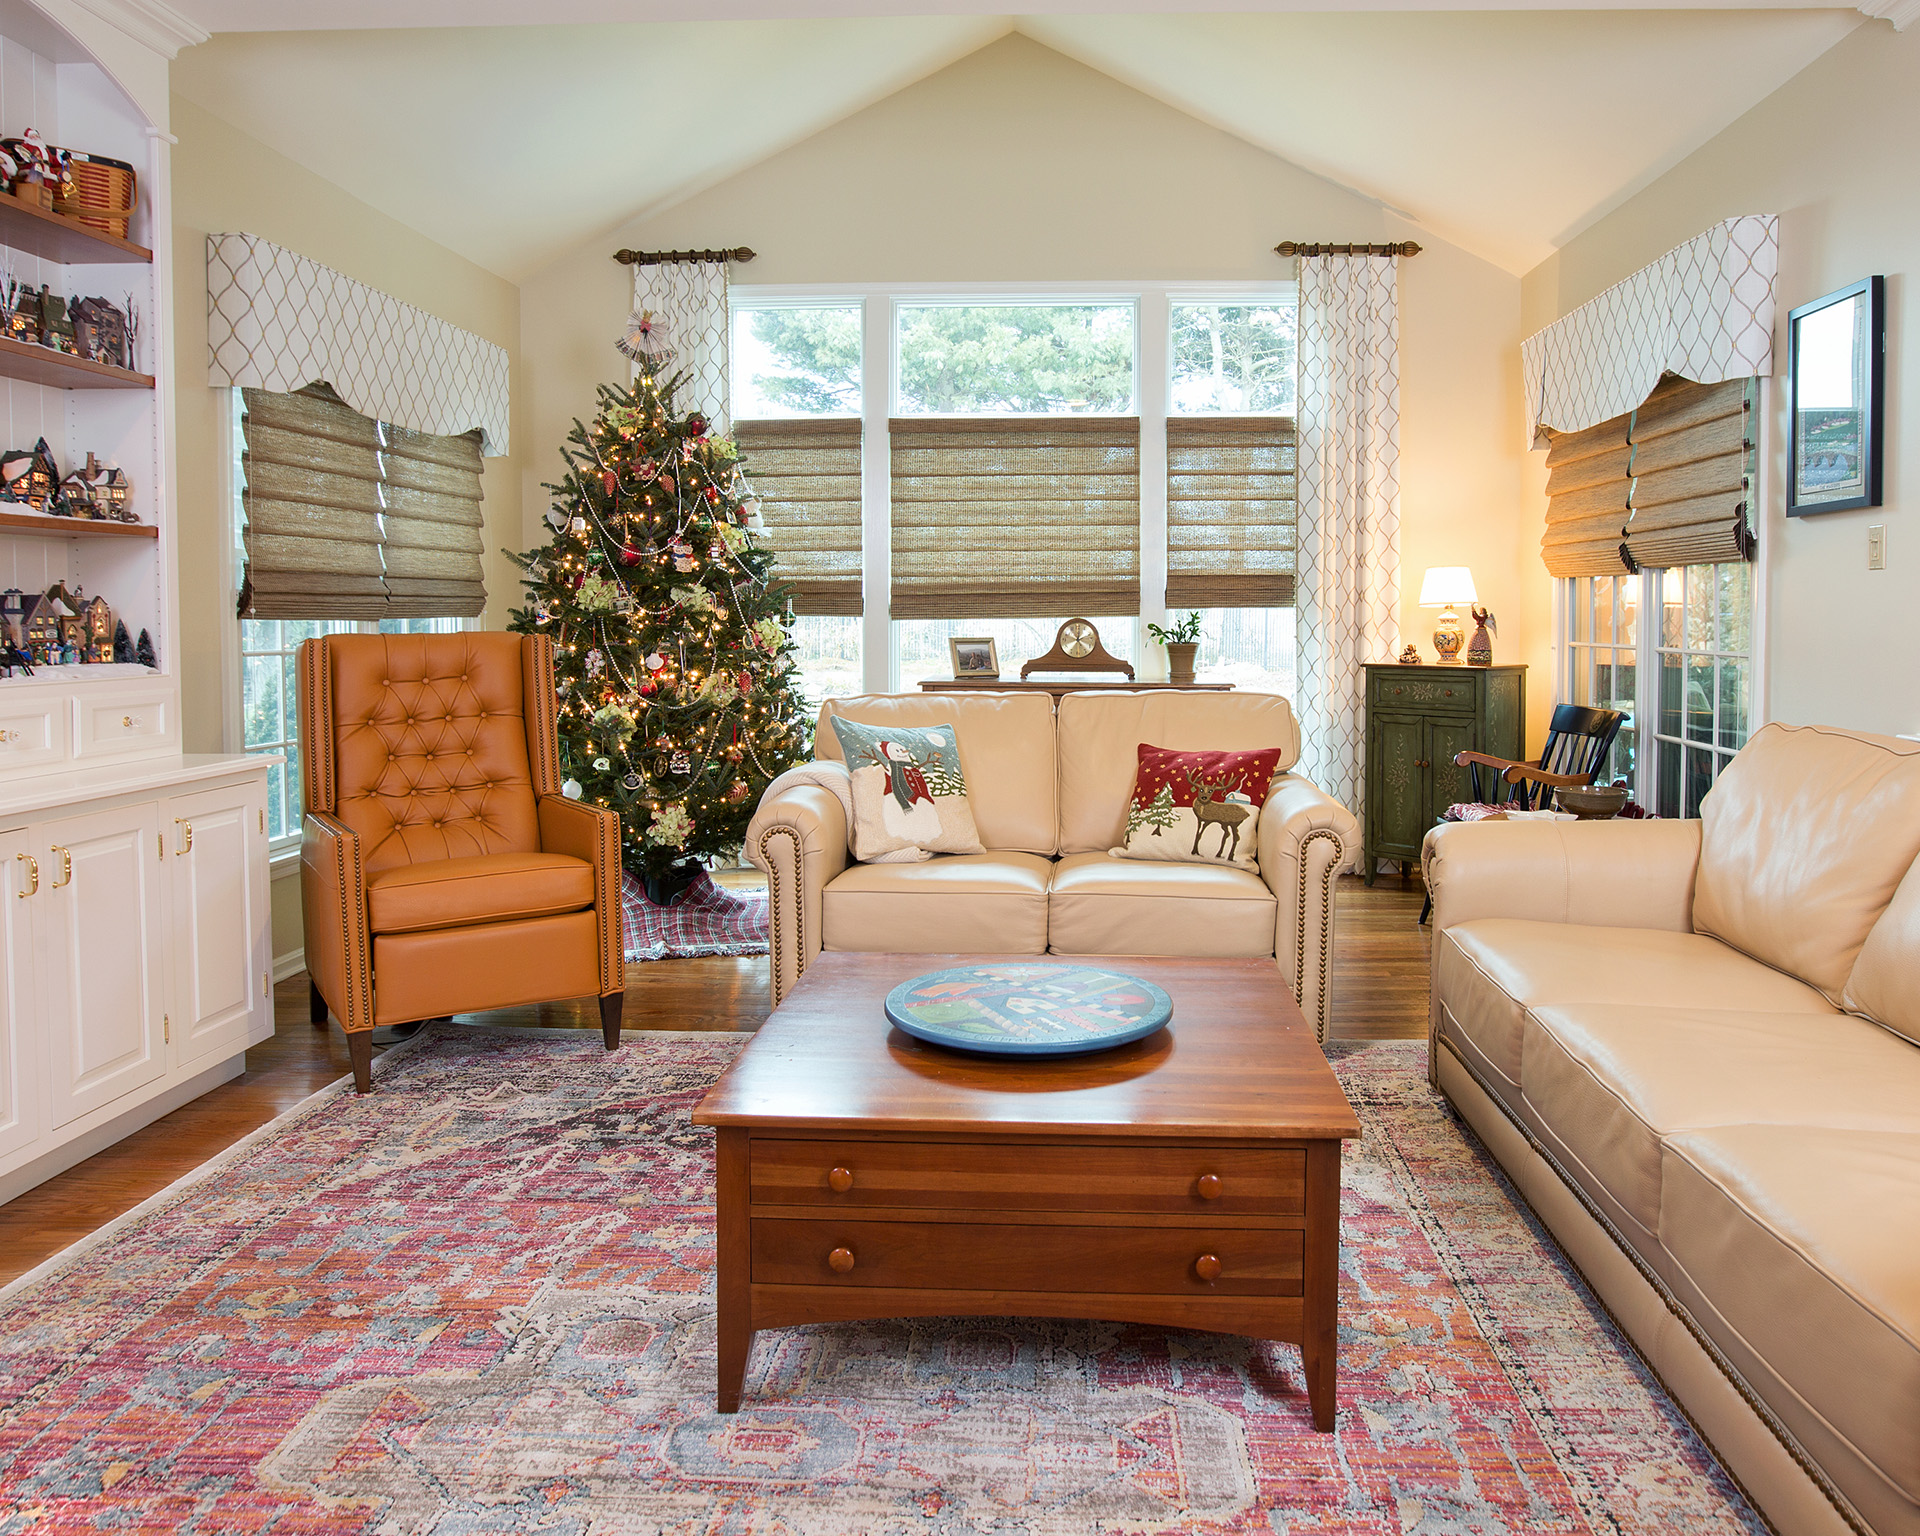 How to evoke the holiday spirit in your home this Christmas